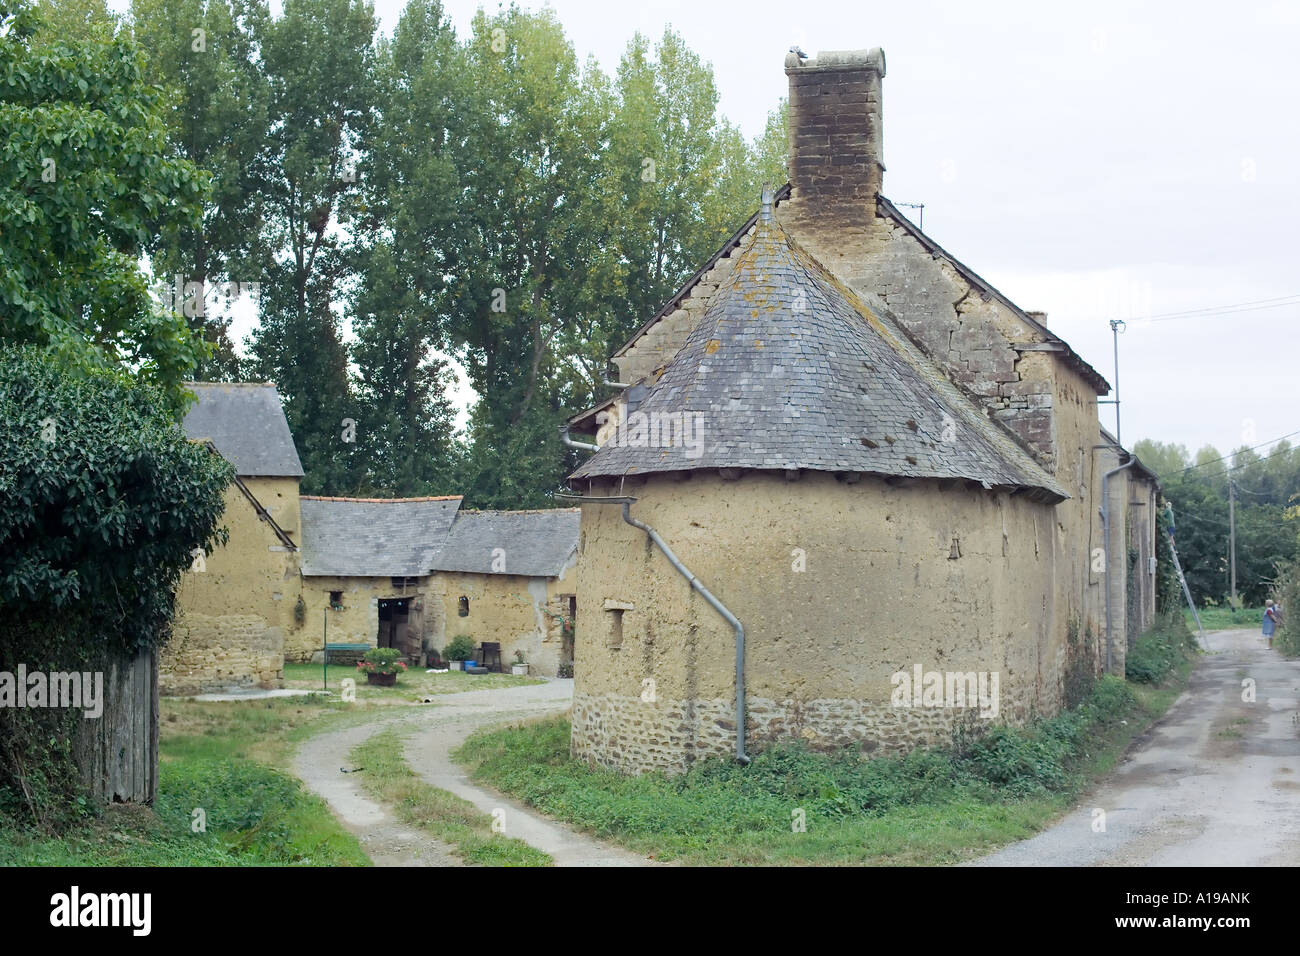 Houses built with earth, "Le Bas Caharel" hamlet, St-Juvat, Brittany, France Stock Photo